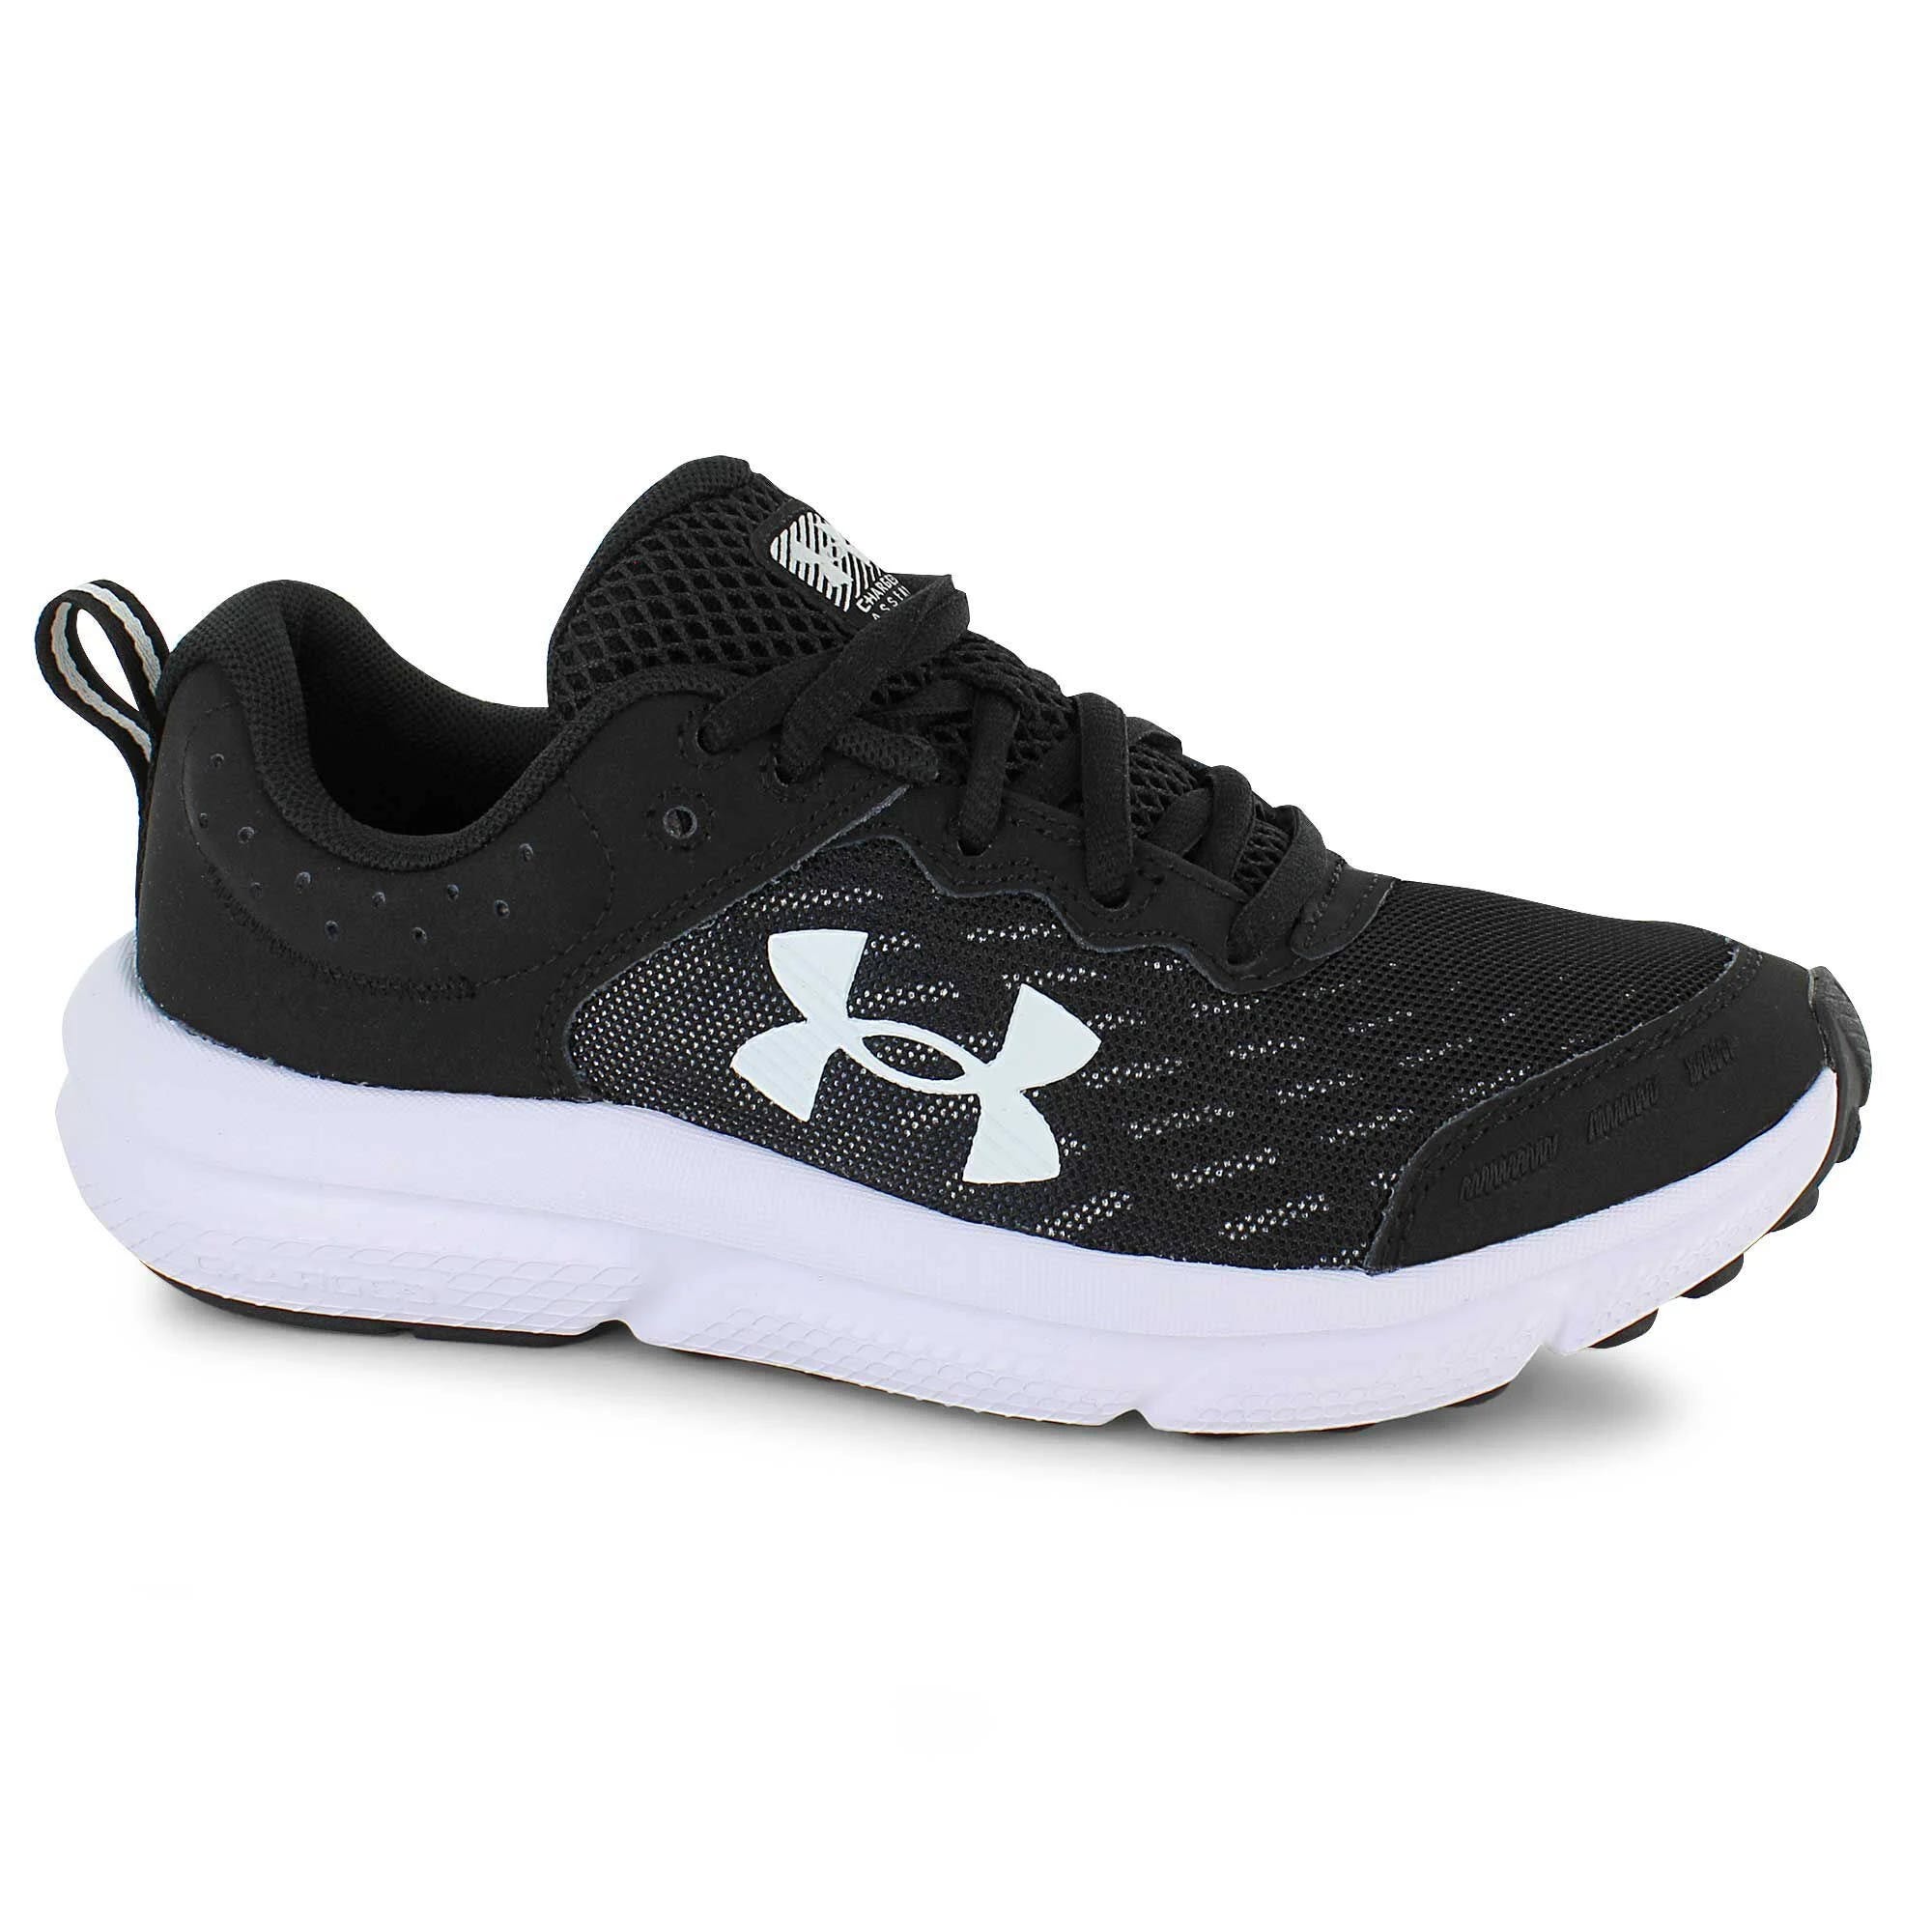 Comfortable, Lightweight Boys' Running Shoes (Black/White, Size 5) | Image